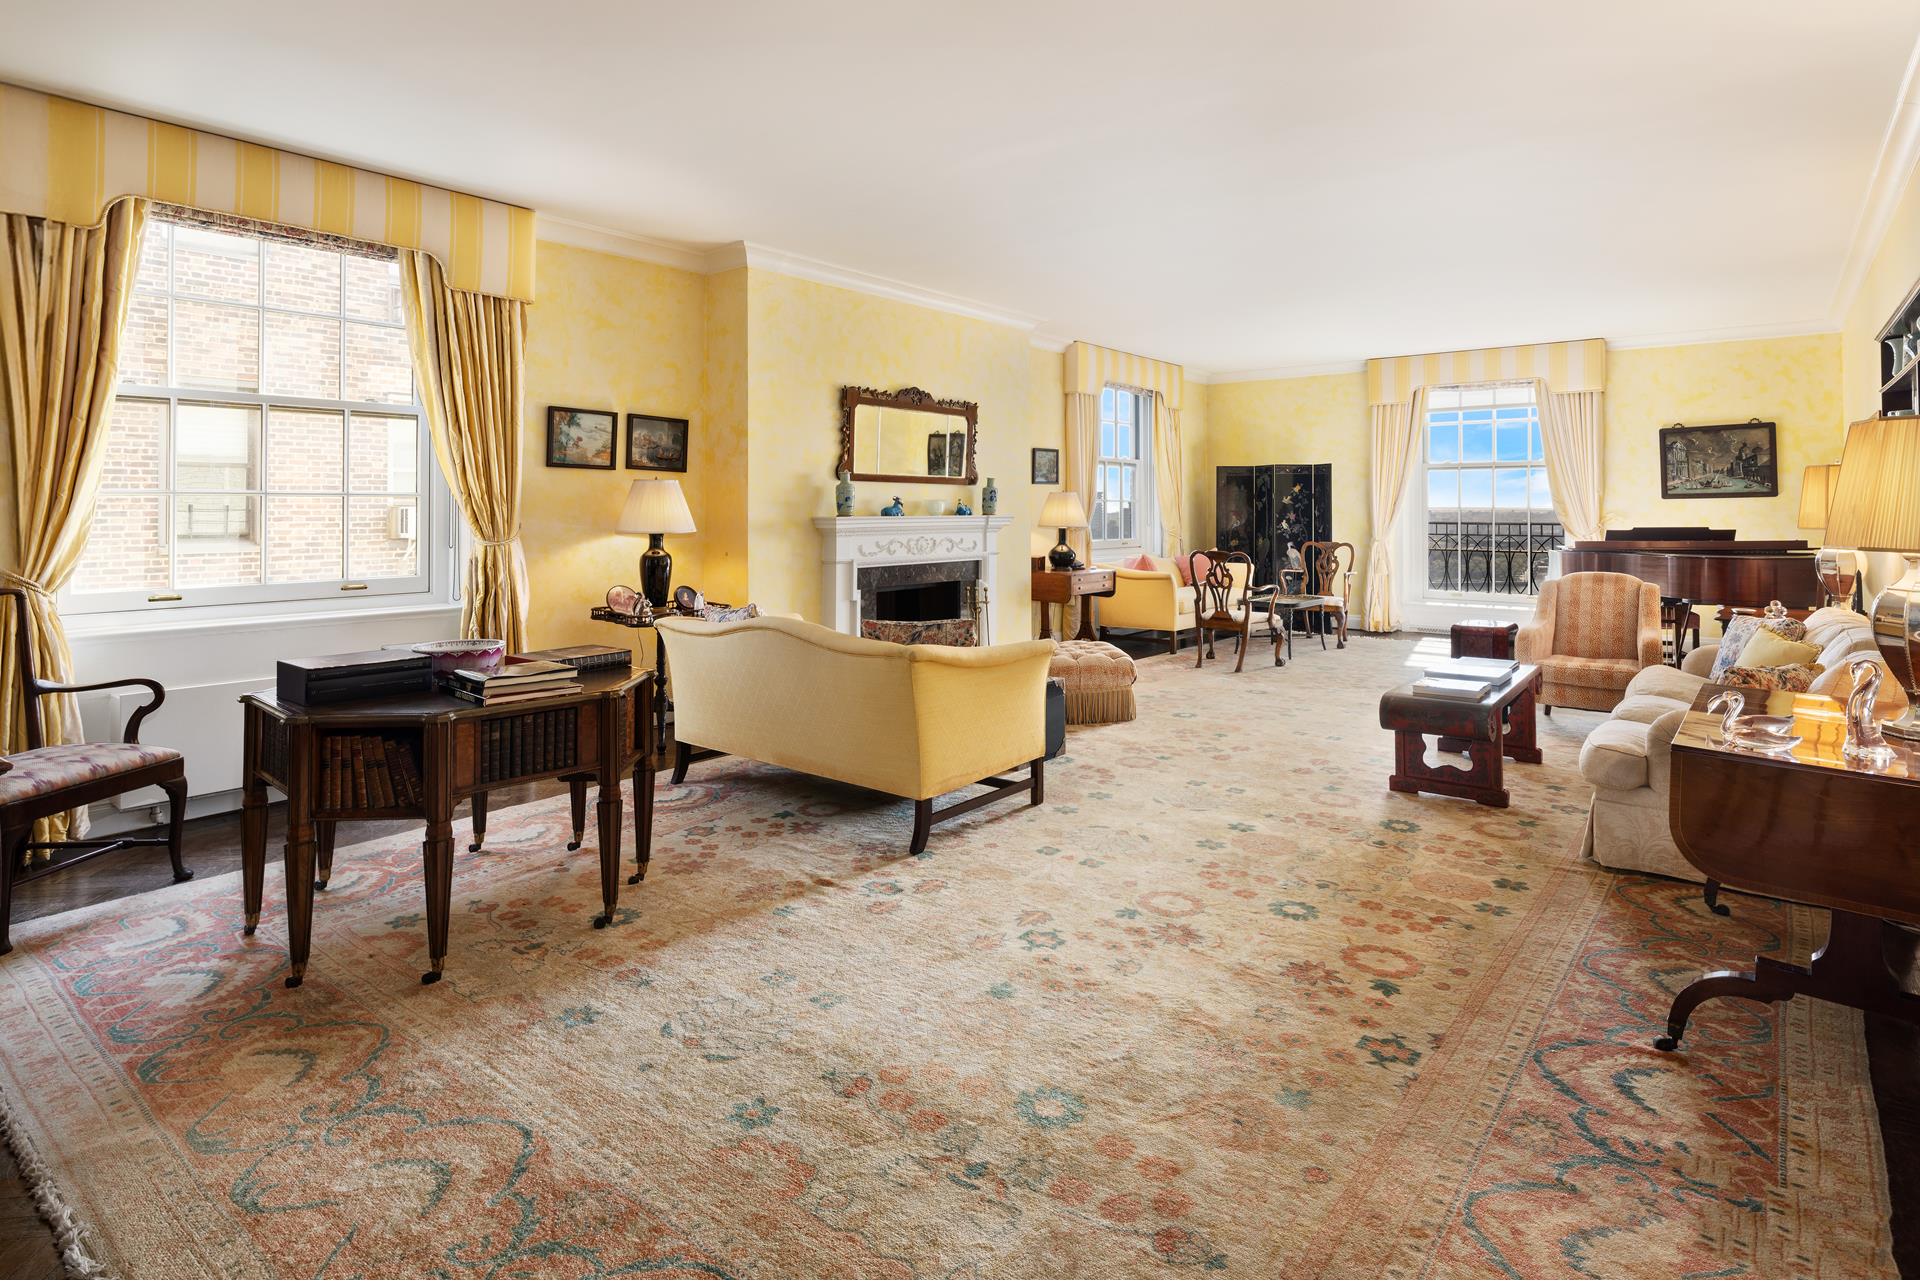 120 East End Avenue 12B, Yorkville, Upper East Side, NYC - 6 Bedrooms  
6.5 Bathrooms  
21 Rooms - 